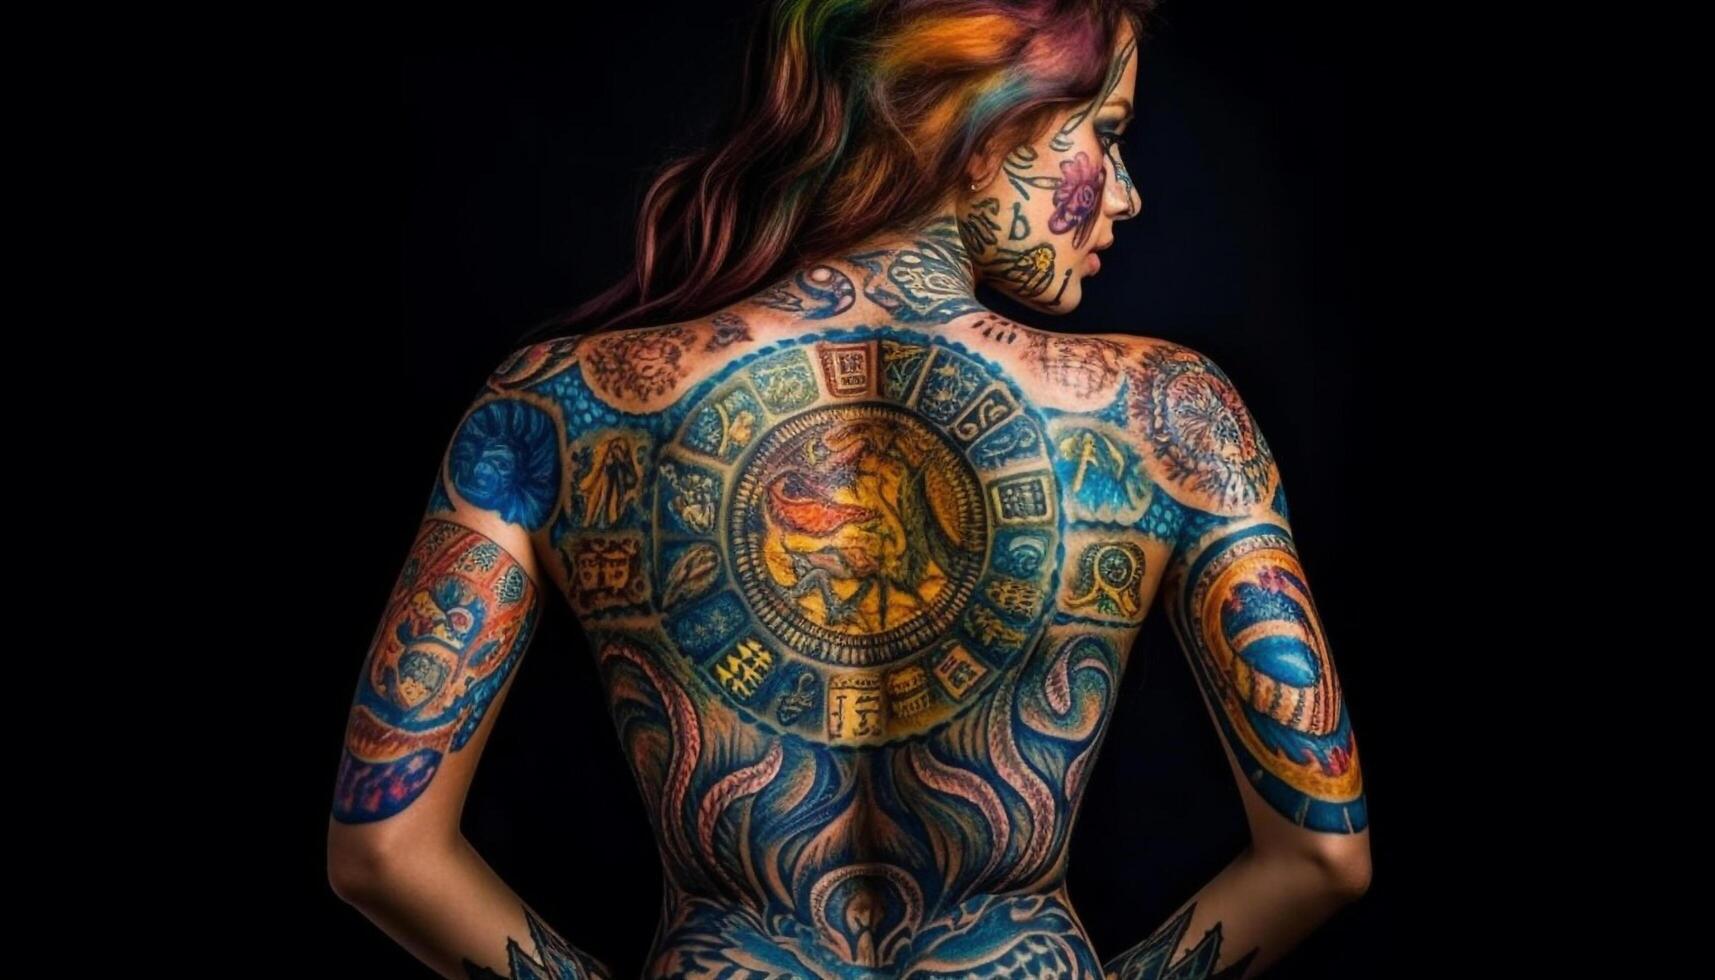 One beautiful woman, adorned in tattoos, exudes sensuality and creativity generated by AI photo